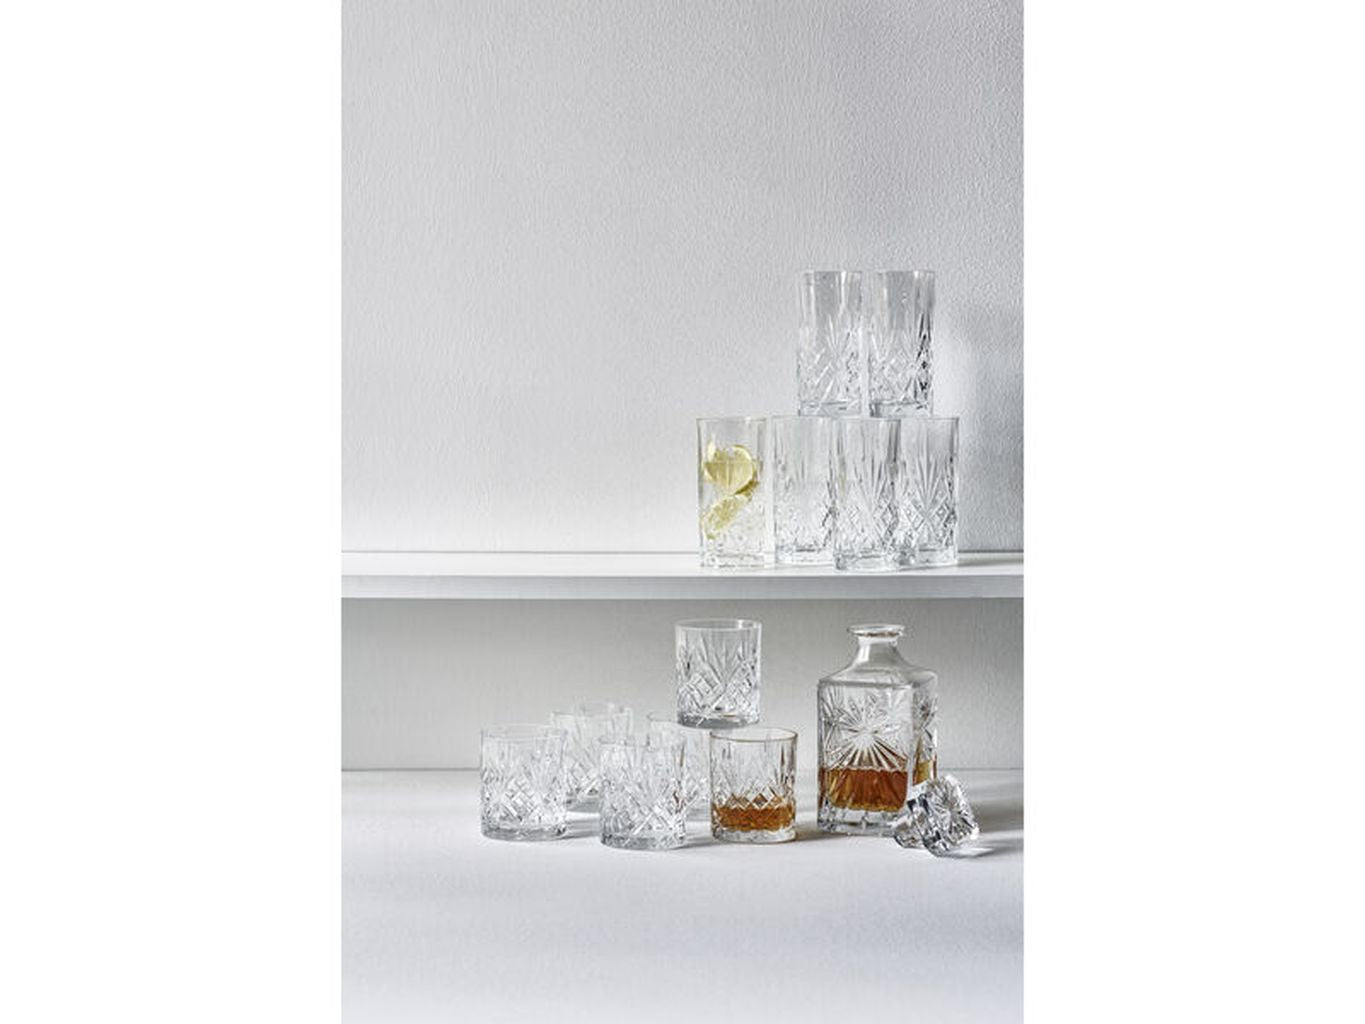 Lyngby Glas Melodia Crystal Highball Drinks Glass 6 Cl, 6 st.